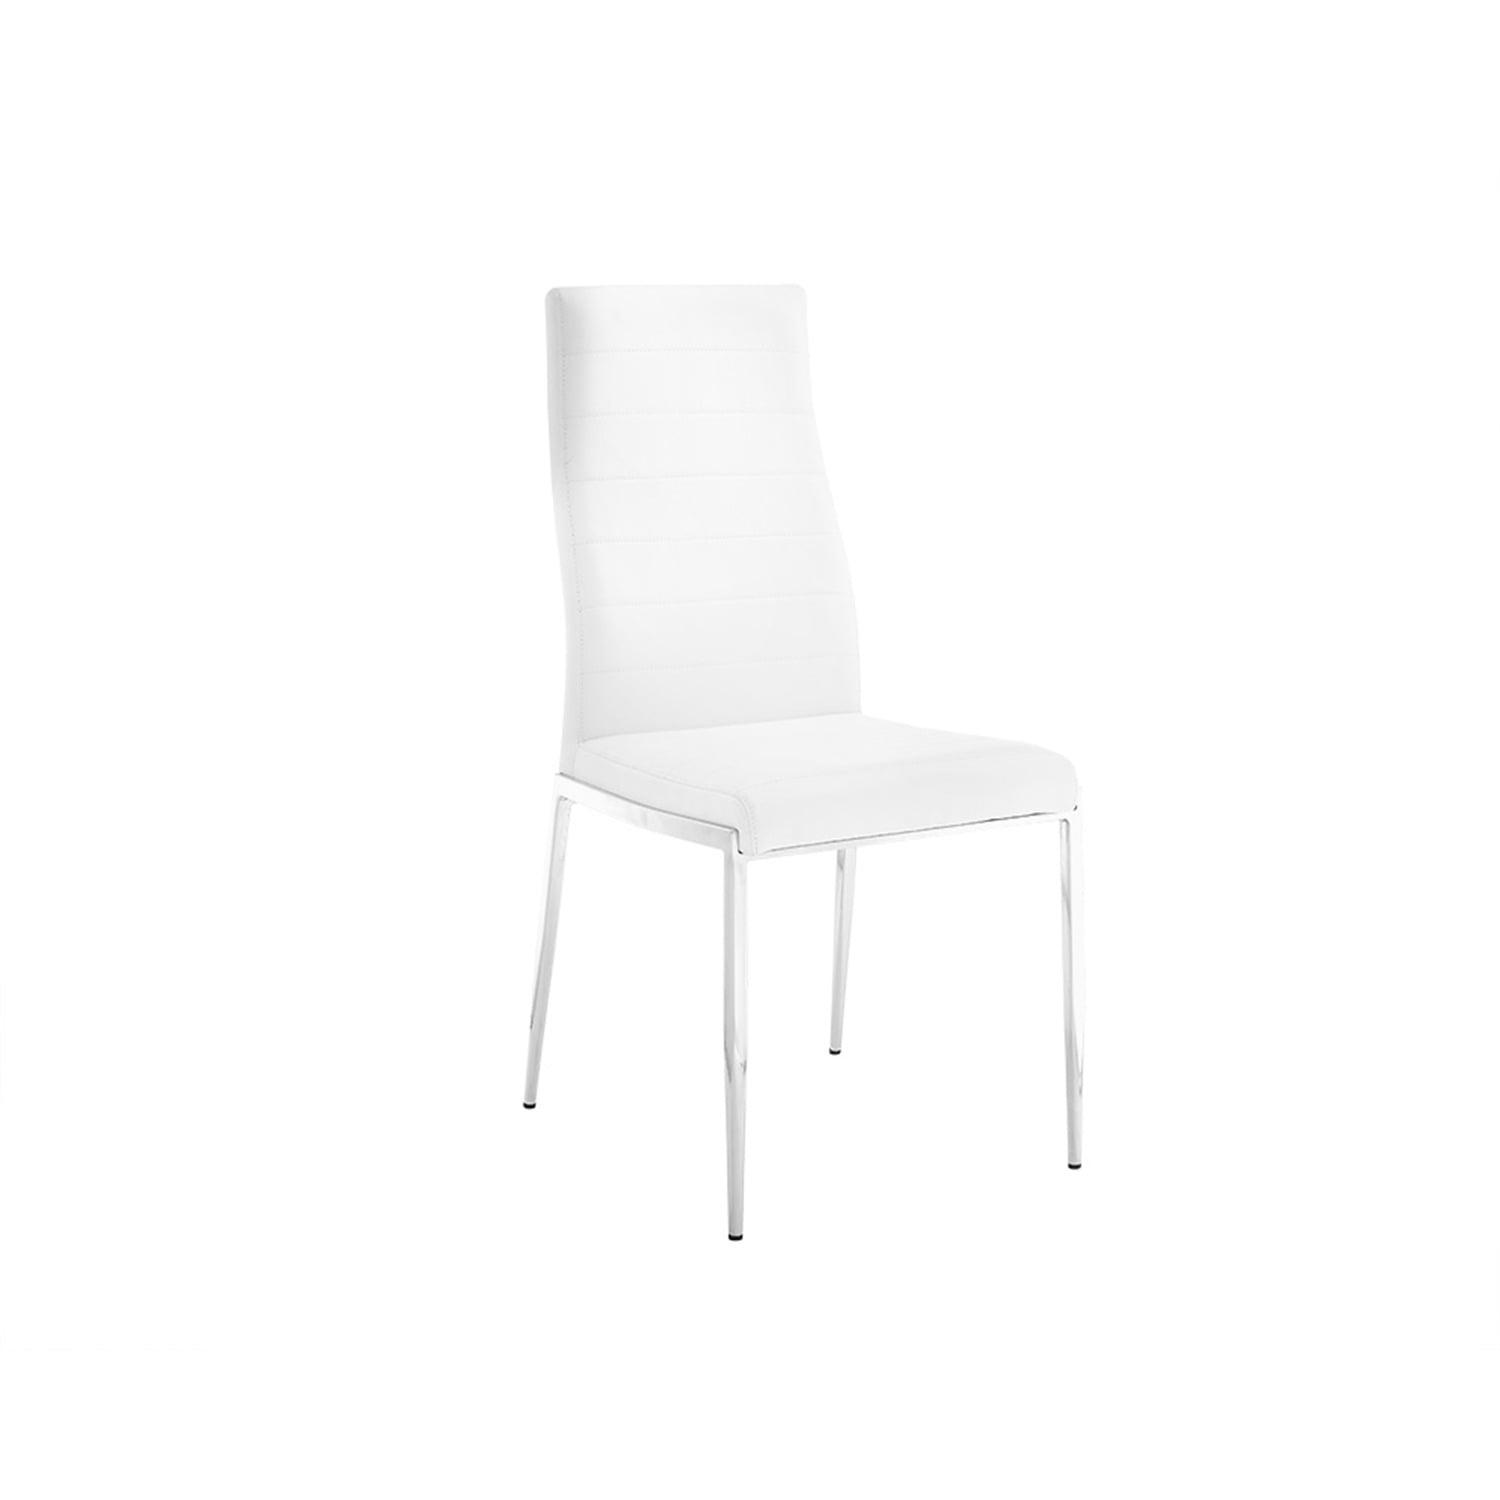 Firenze White PU-Leather and Metal Dining Chair